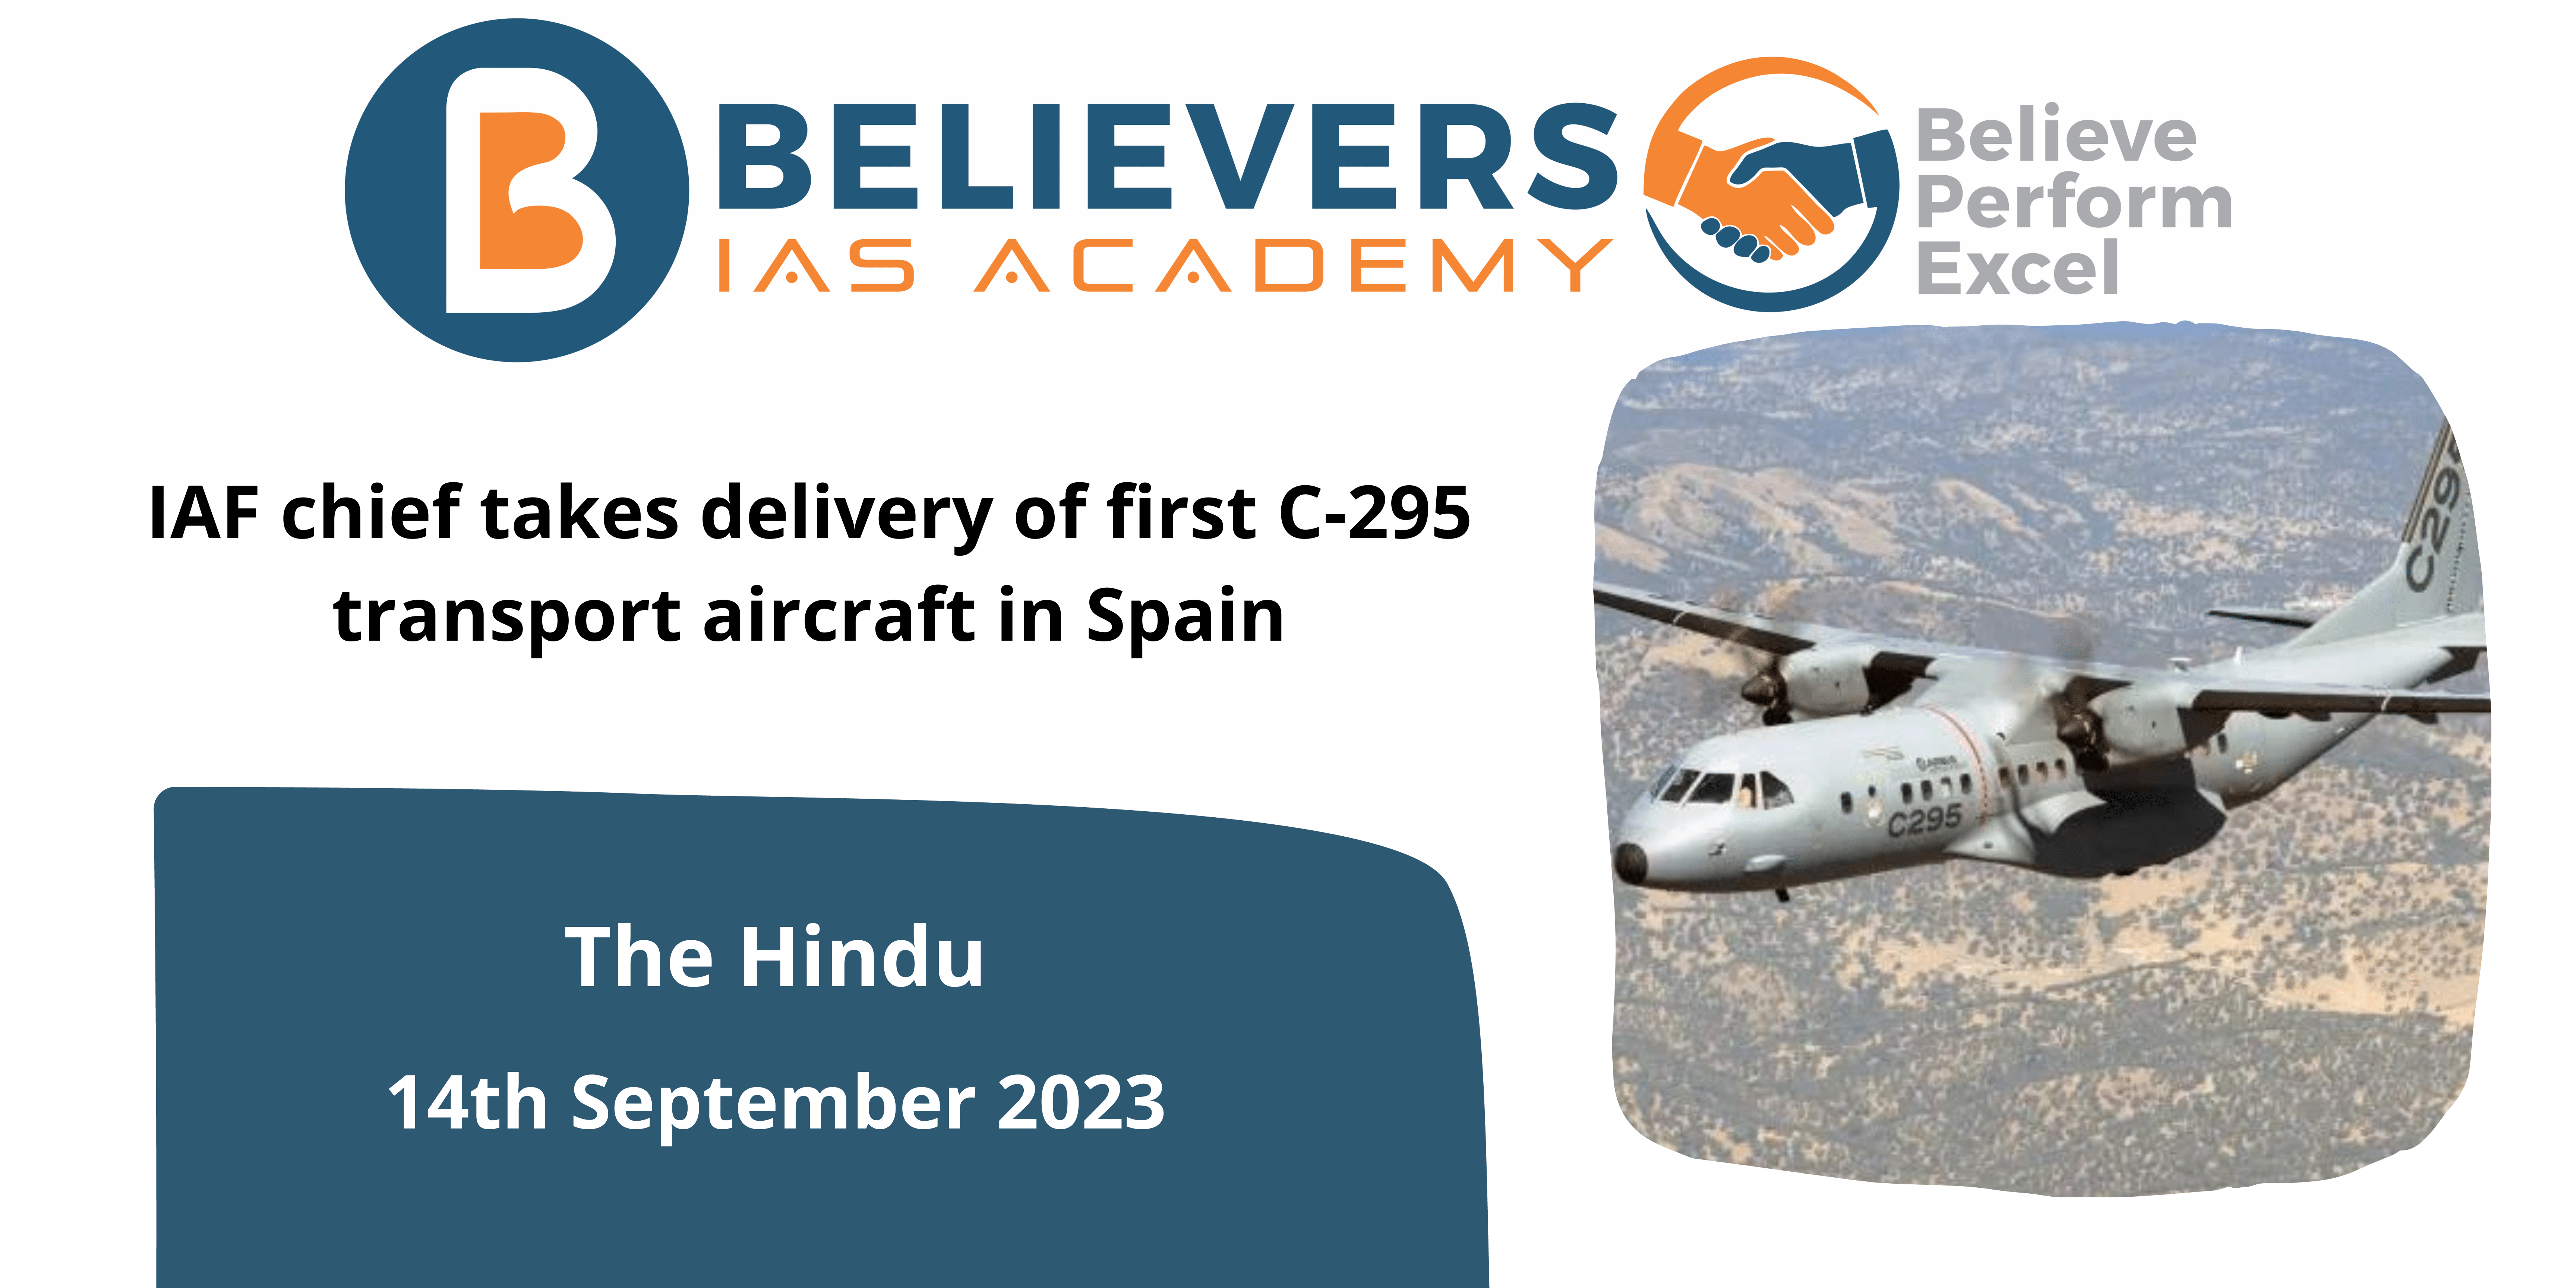 IAF chief takes delivery of first C-295 transport aircraft in Spain